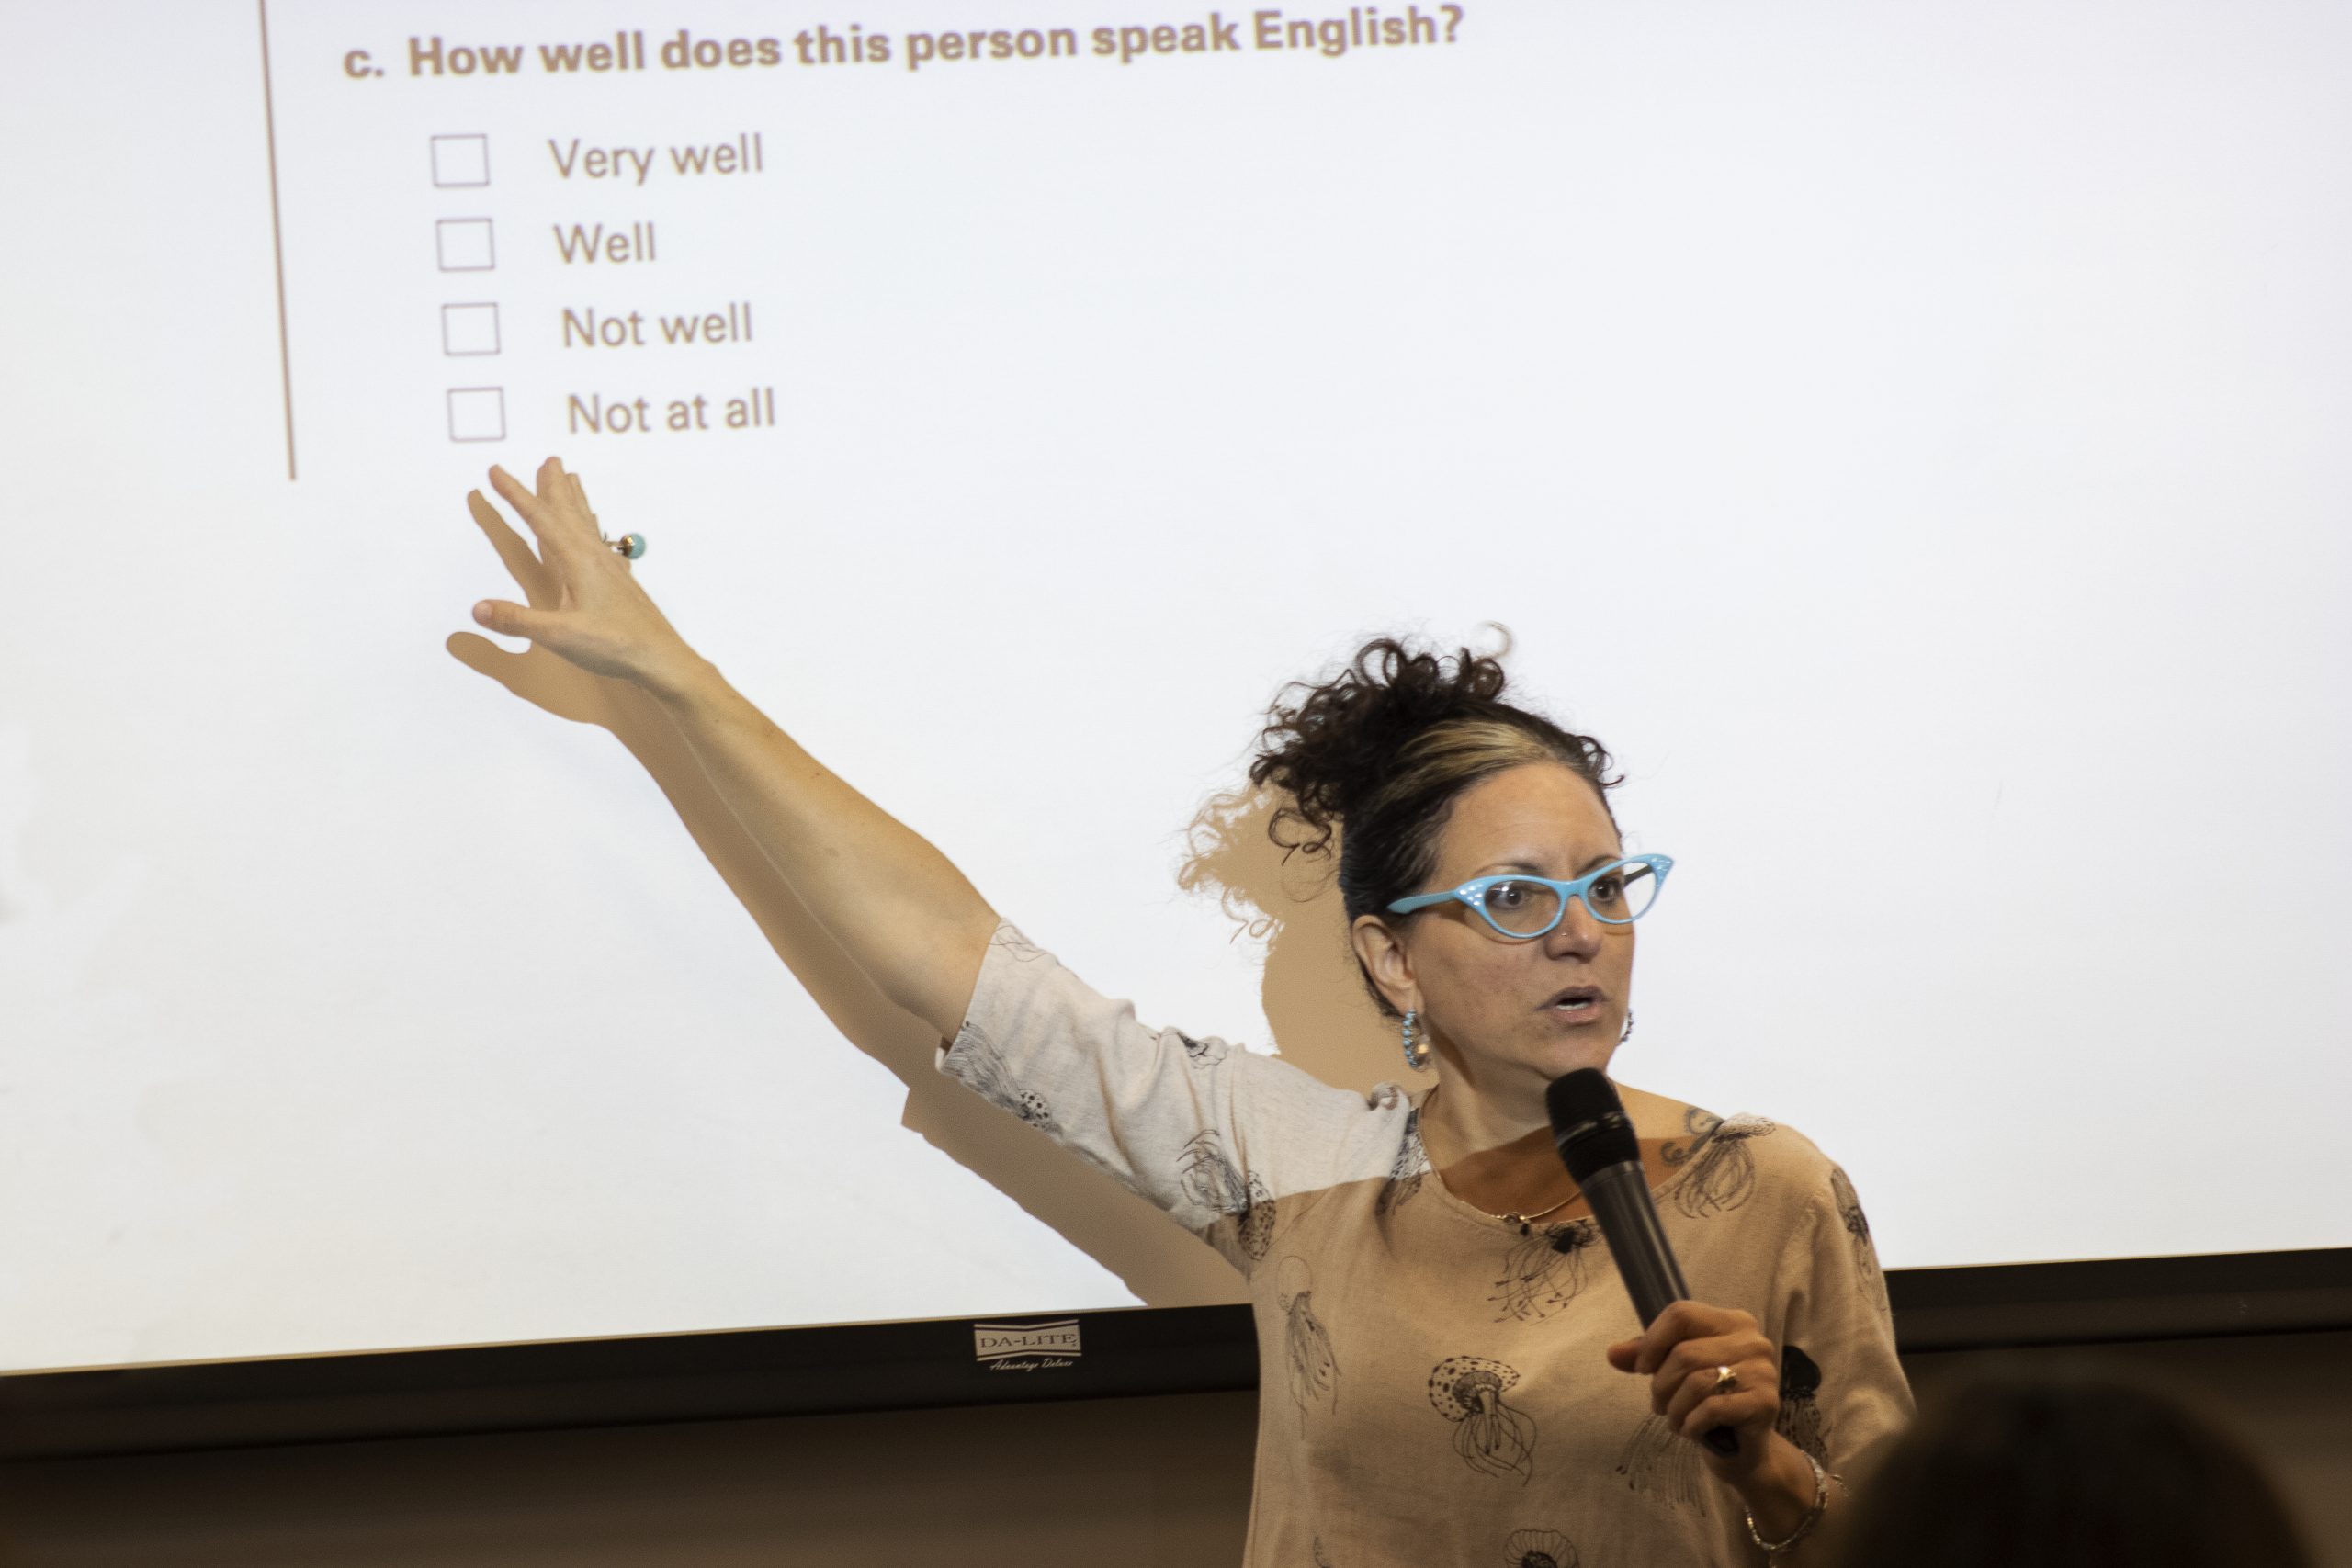 Speaker Kim Potowski came to Western to celebrate bilingualism and educate about ways to increase it